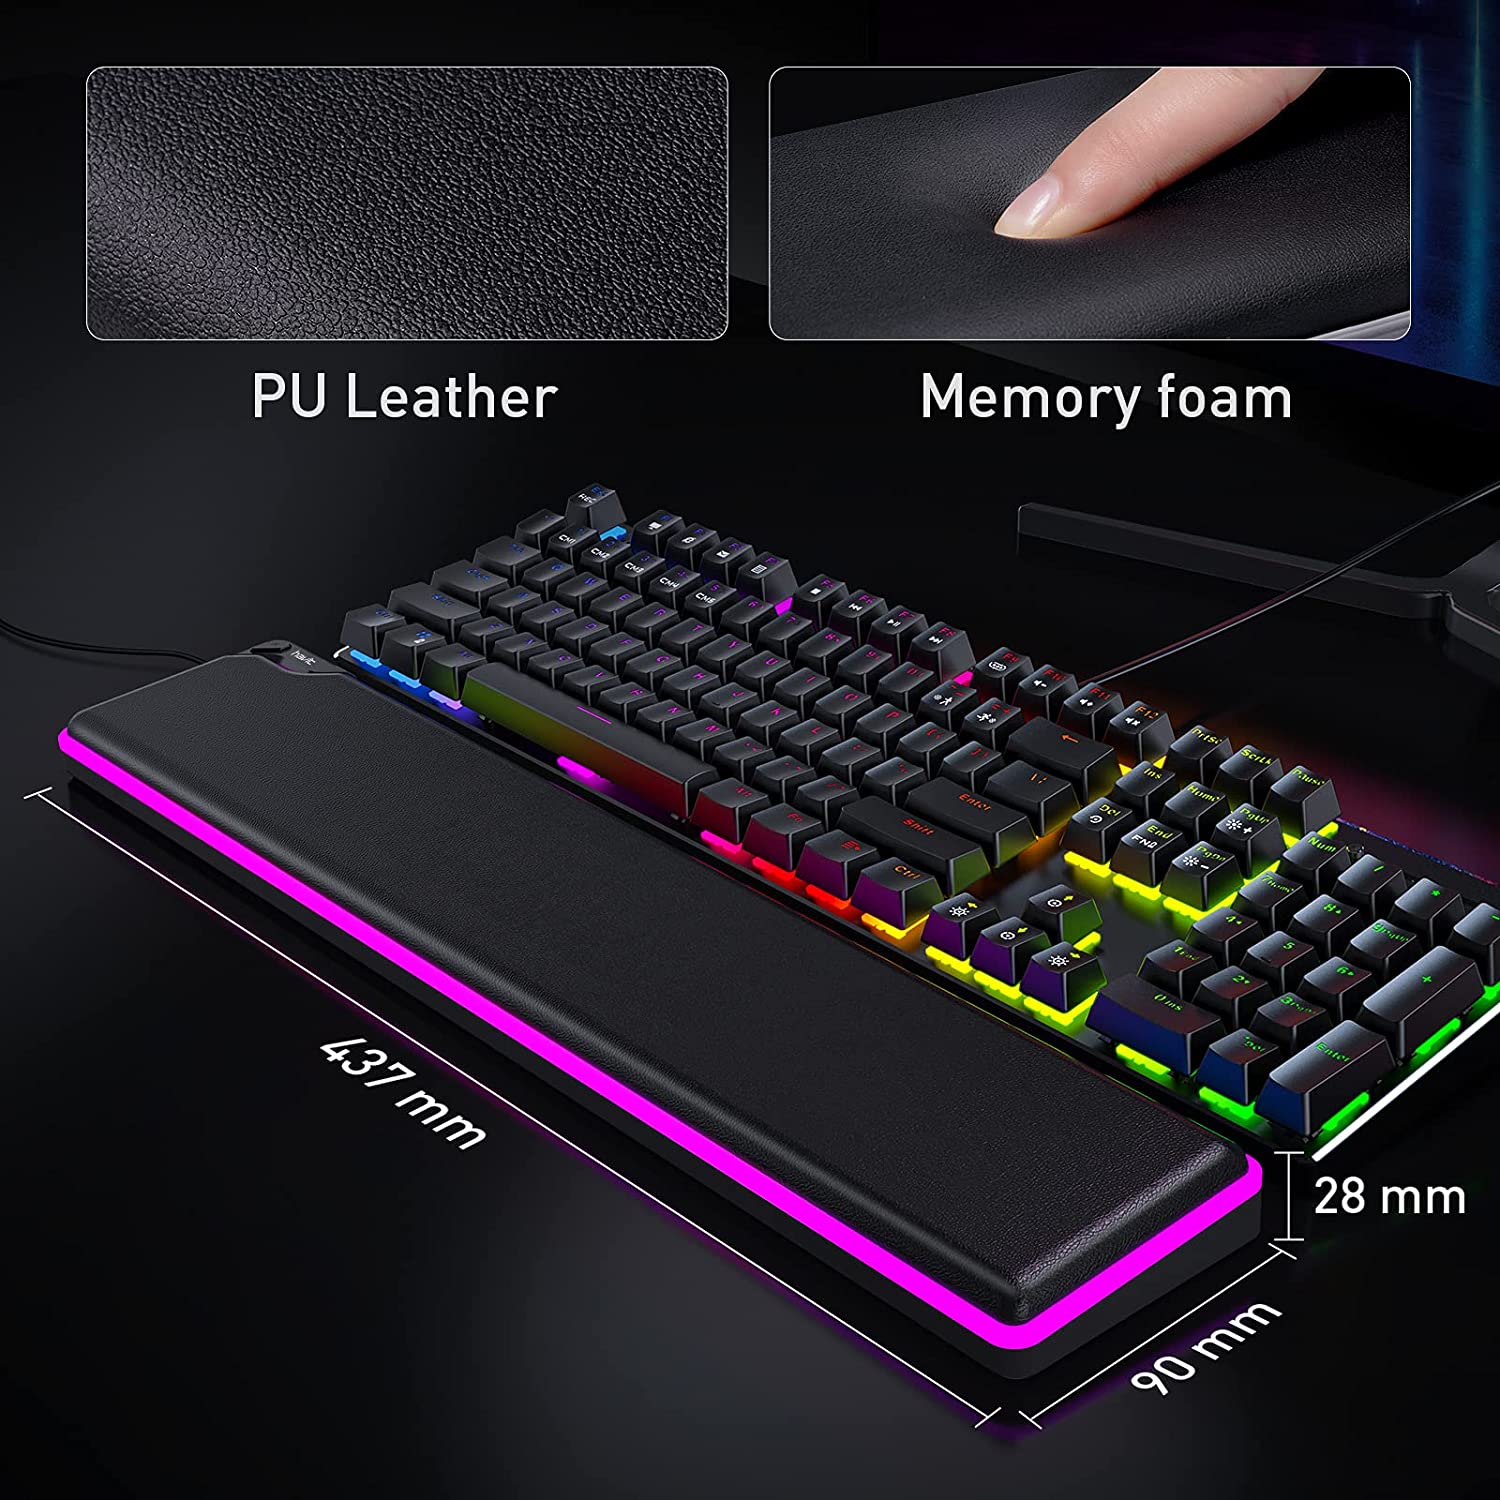 HAVIT MP906 RGB Keyboard Wrist Rest, Memory Foam Material, for Computer Laptop Office, PC Gaming